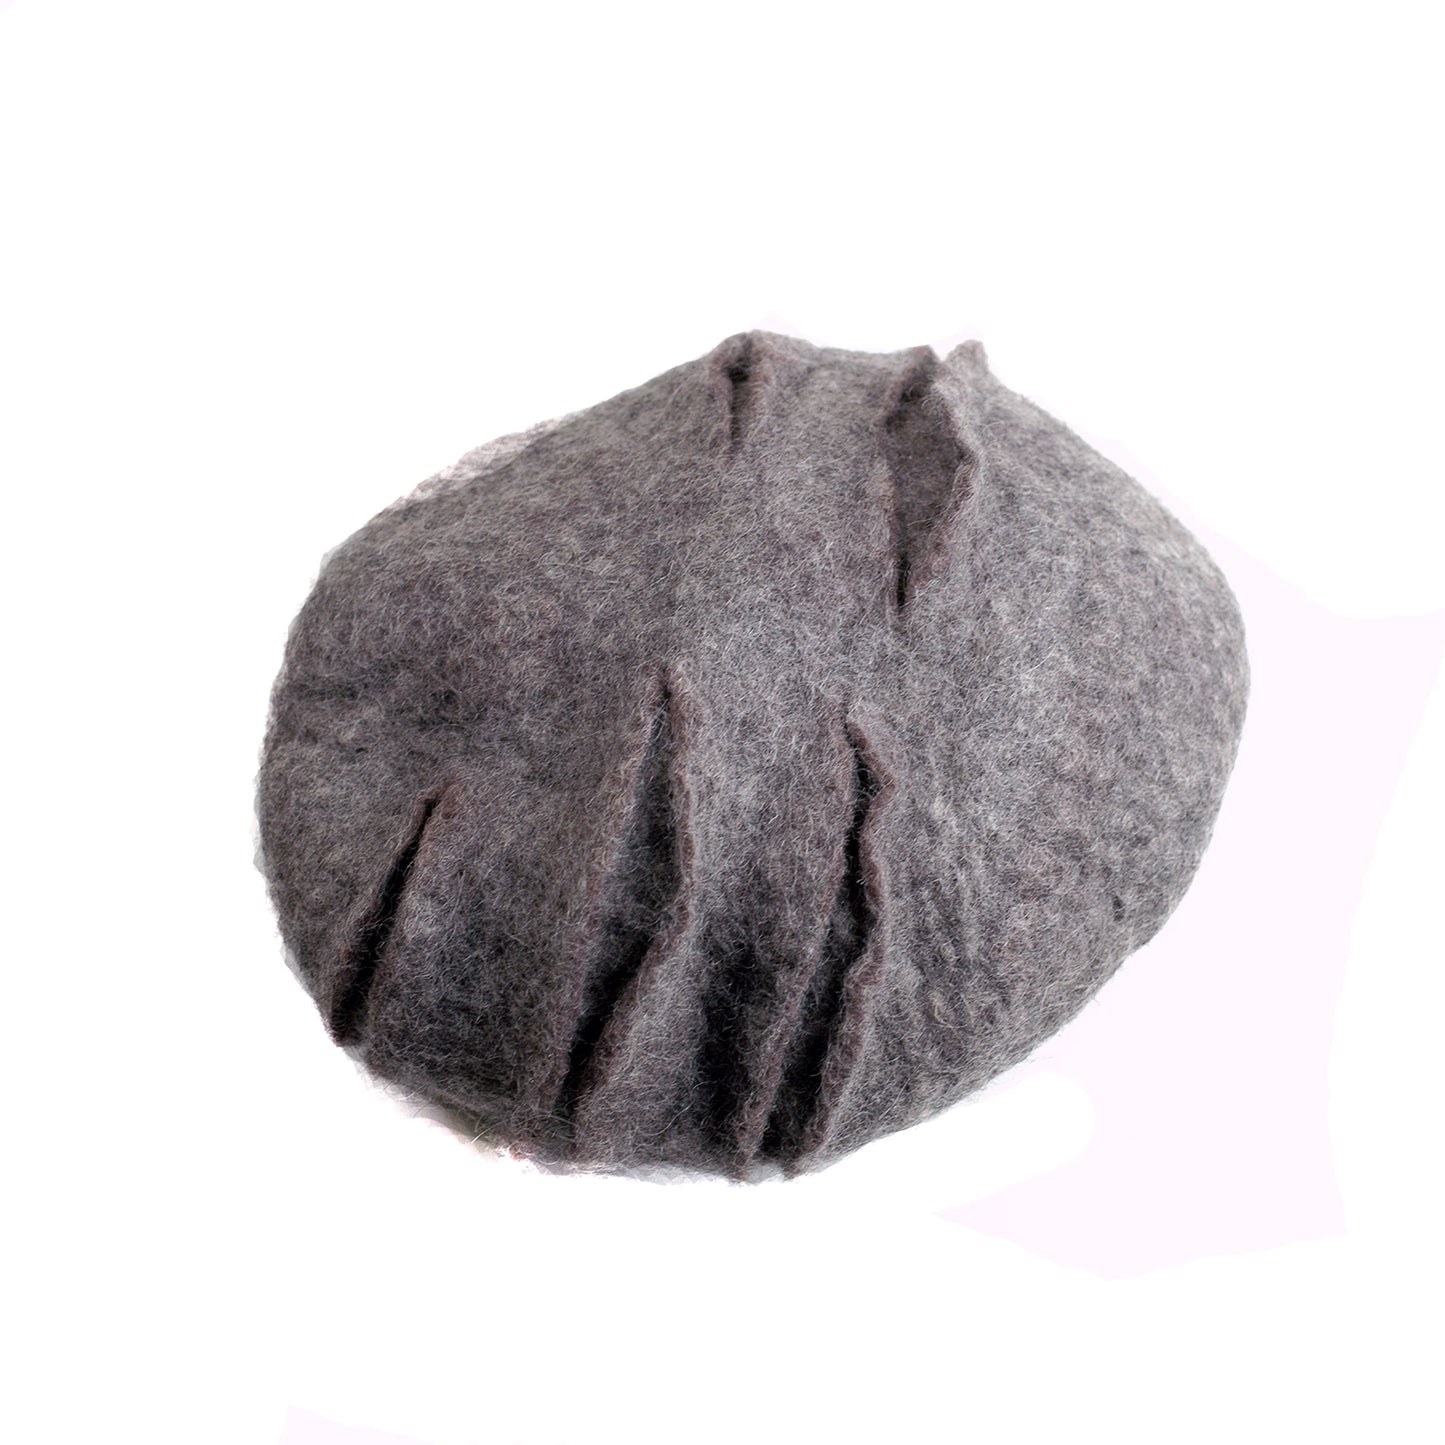 Gray Gotland Wool Felted Beret with Slashes - top view